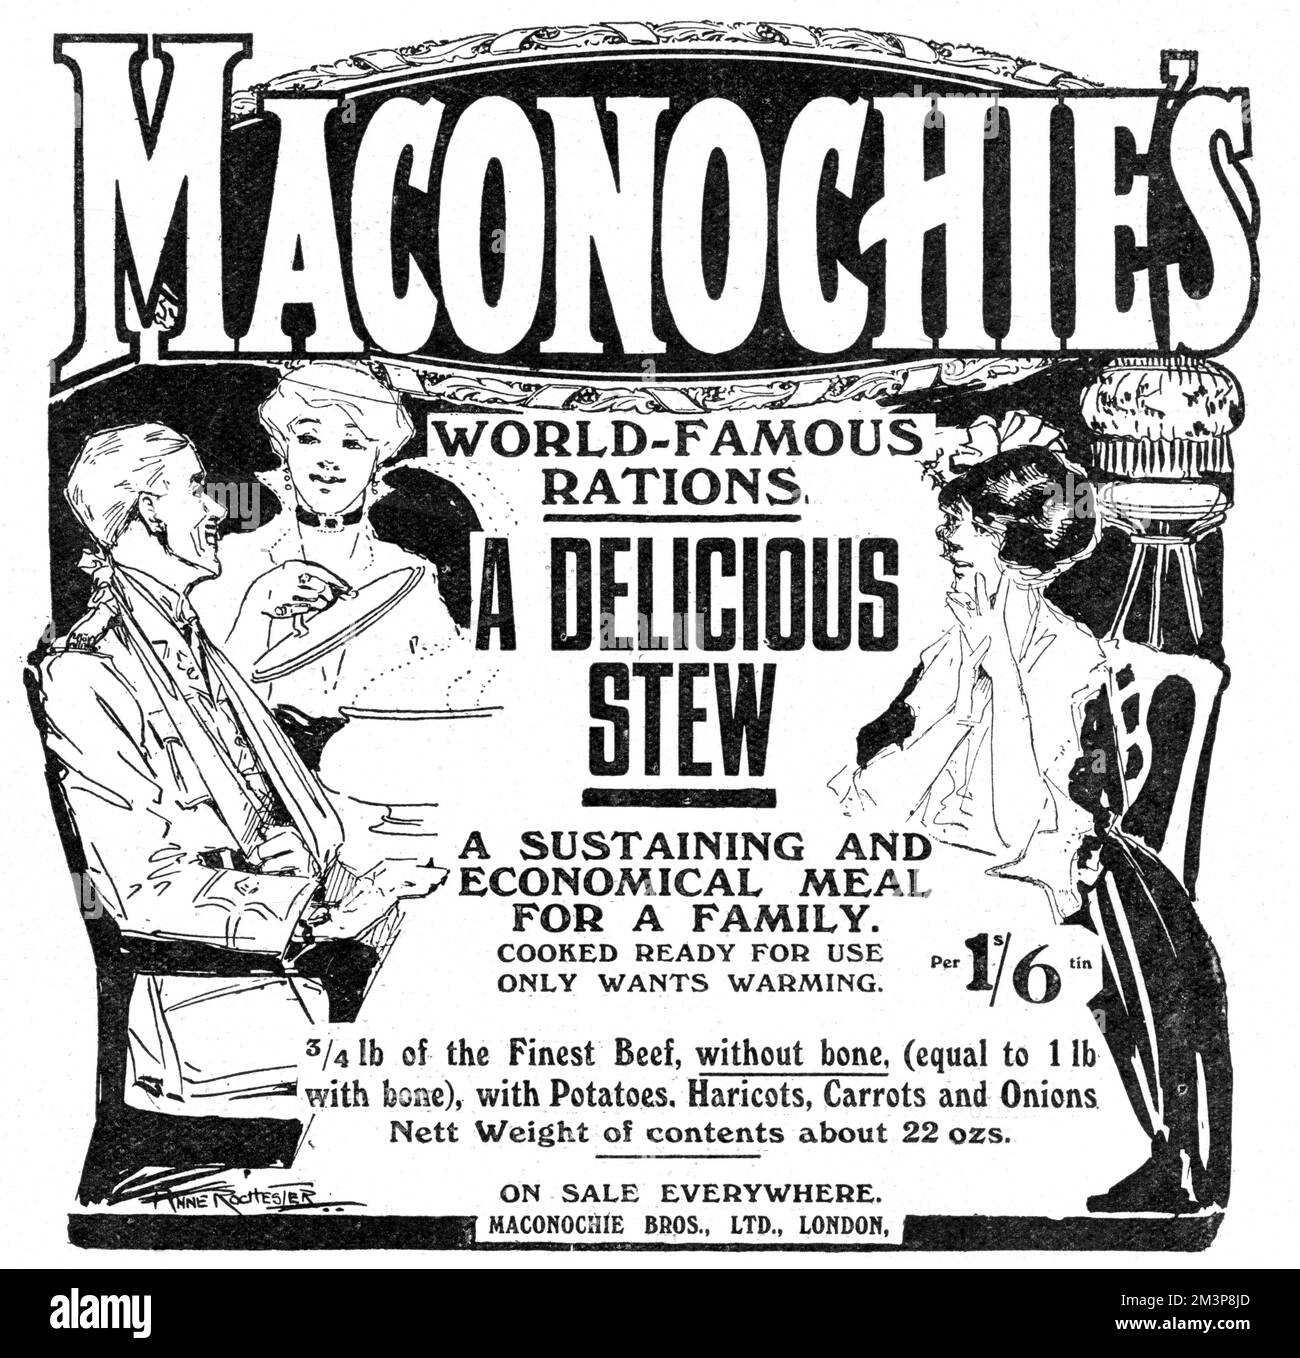 Advertisement for the famous Maconochie's beef stew, 3/4lb of finest beef, WITHOUT BONE with potatoes, haricot beans, carrots and onions. Provides a sustaining and economical ready meal for the family. Stock Photo